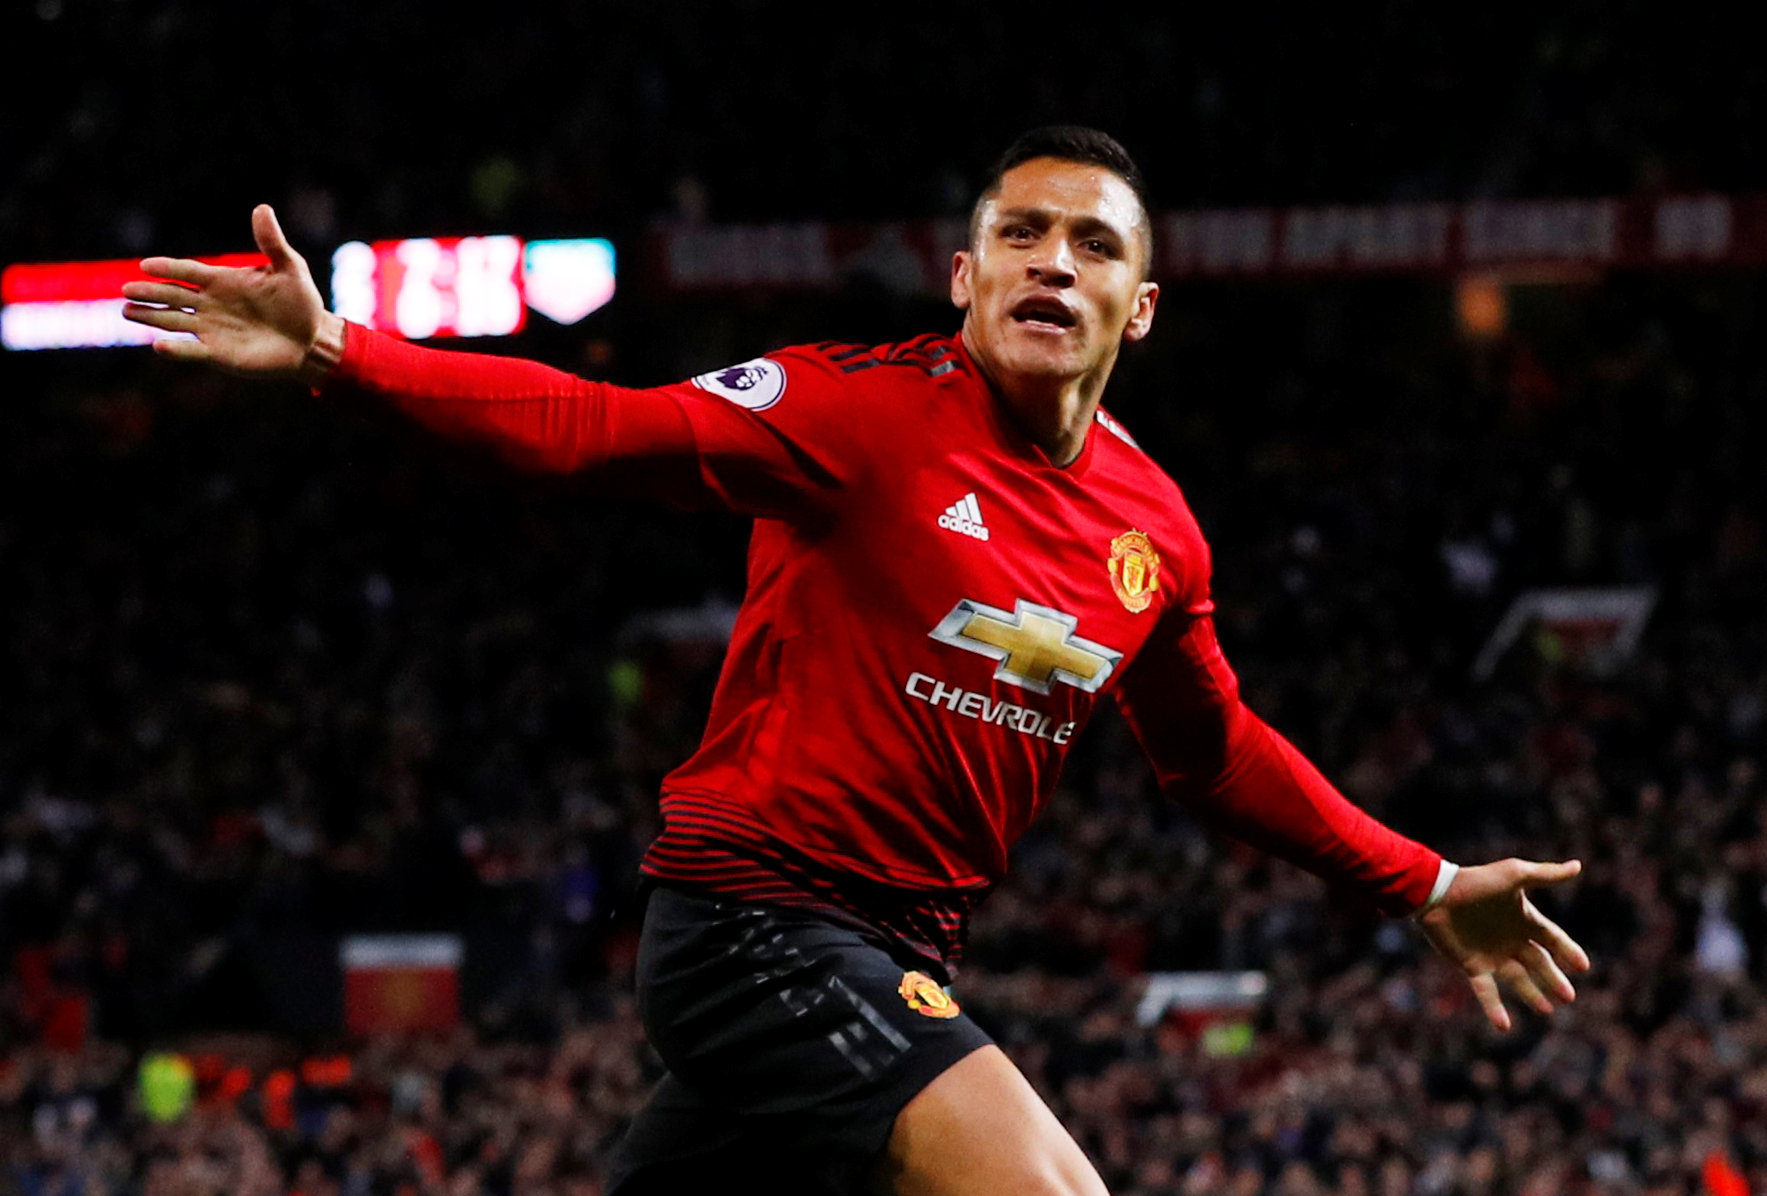 Football: Sanchez rescues United and Mourinho with late winner